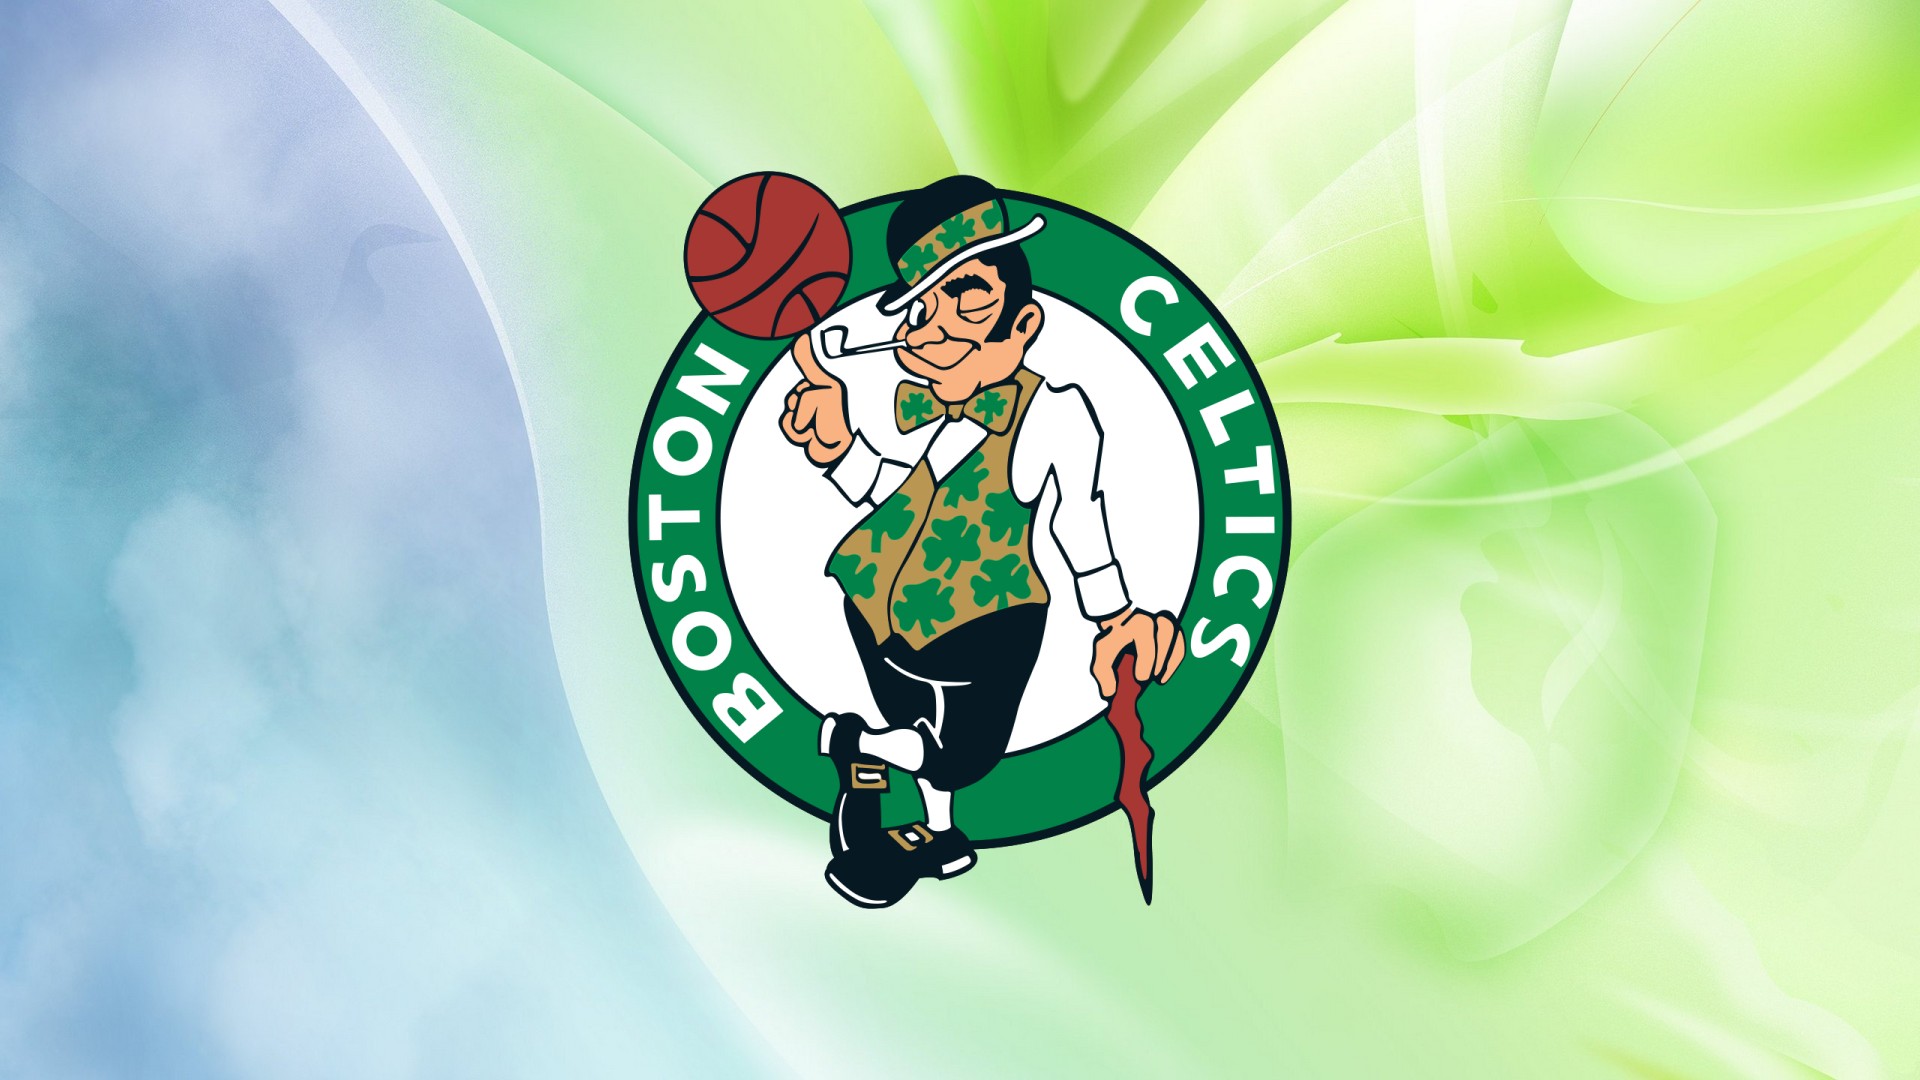 HD Wallpaper Boston Celtics With Resolution 1920X1080 pixel. You can make this wallpaper for your Desktop Computer Backgrounds, Mac Wallpapers, Android Lock screen or iPhone Screensavers